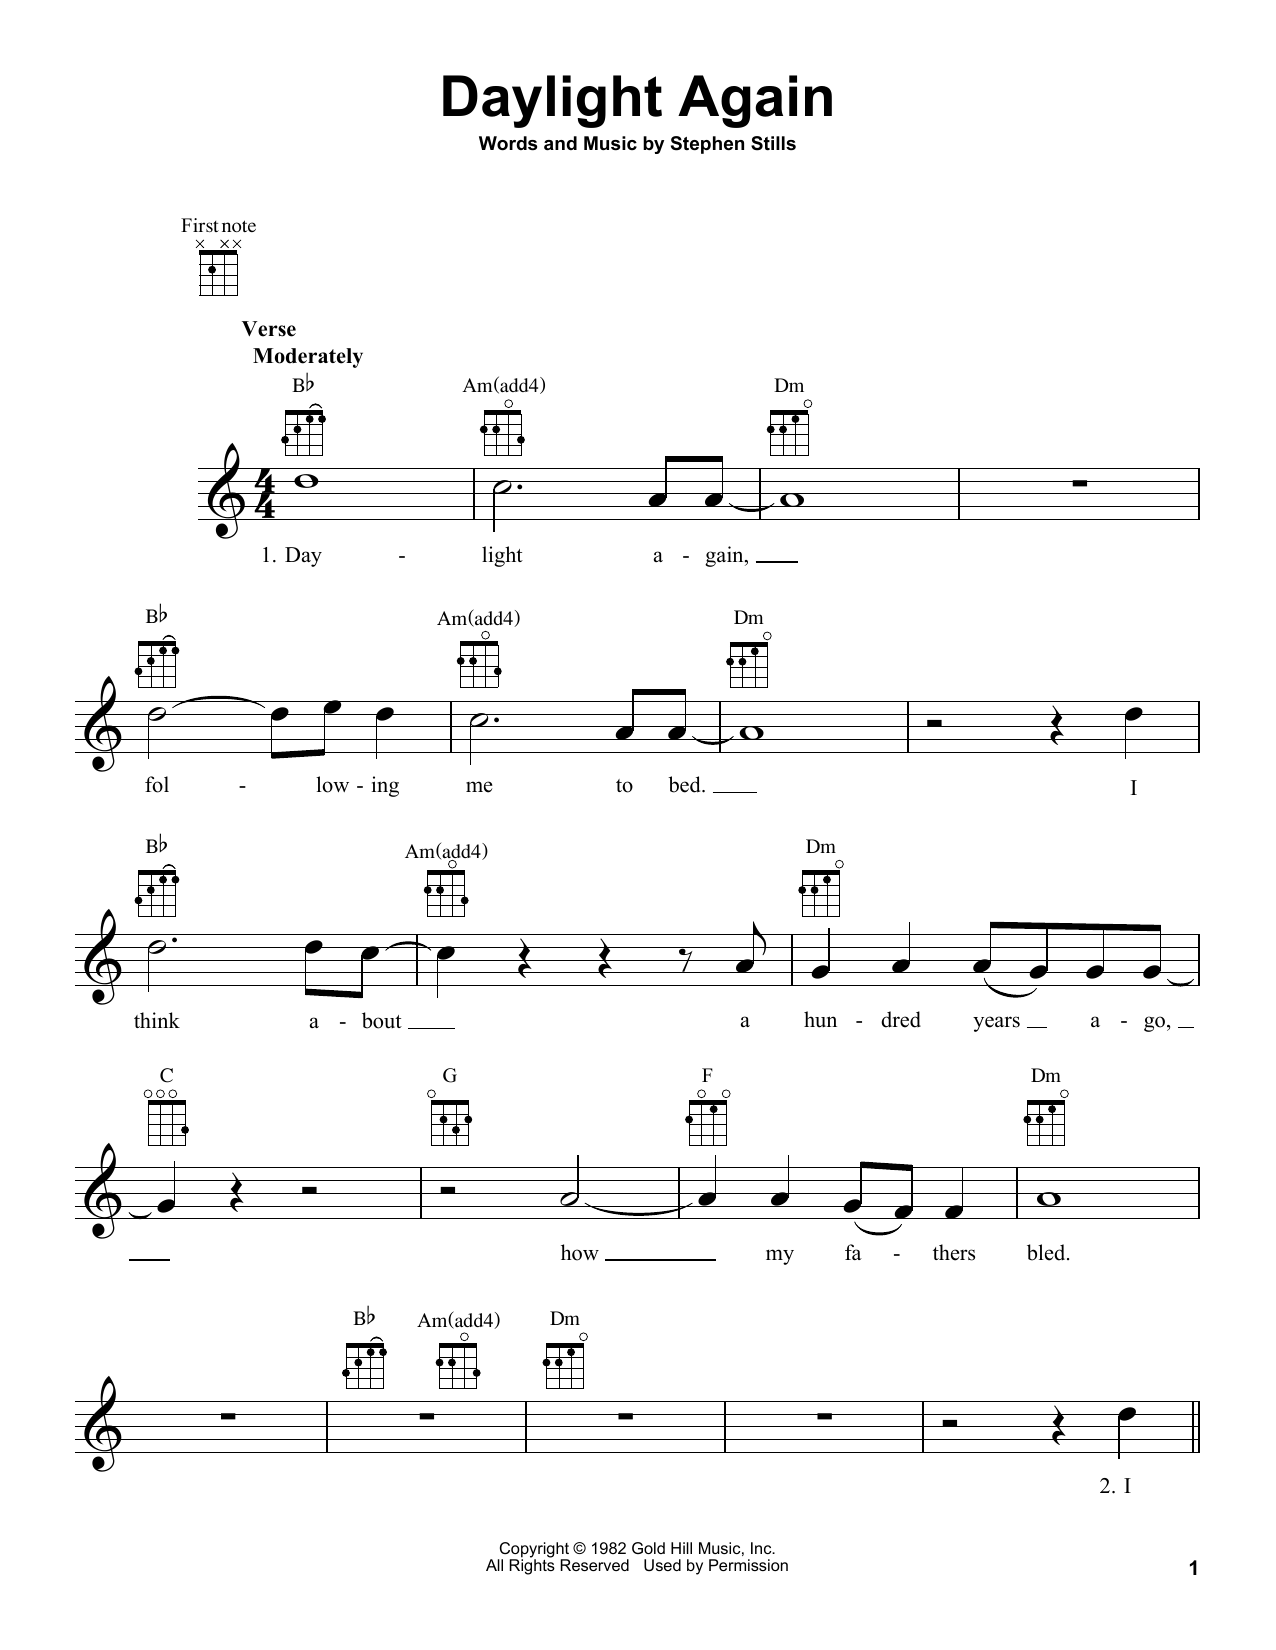 Download Crosby, Stills, Nash & Young Daylight Again Sheet Music